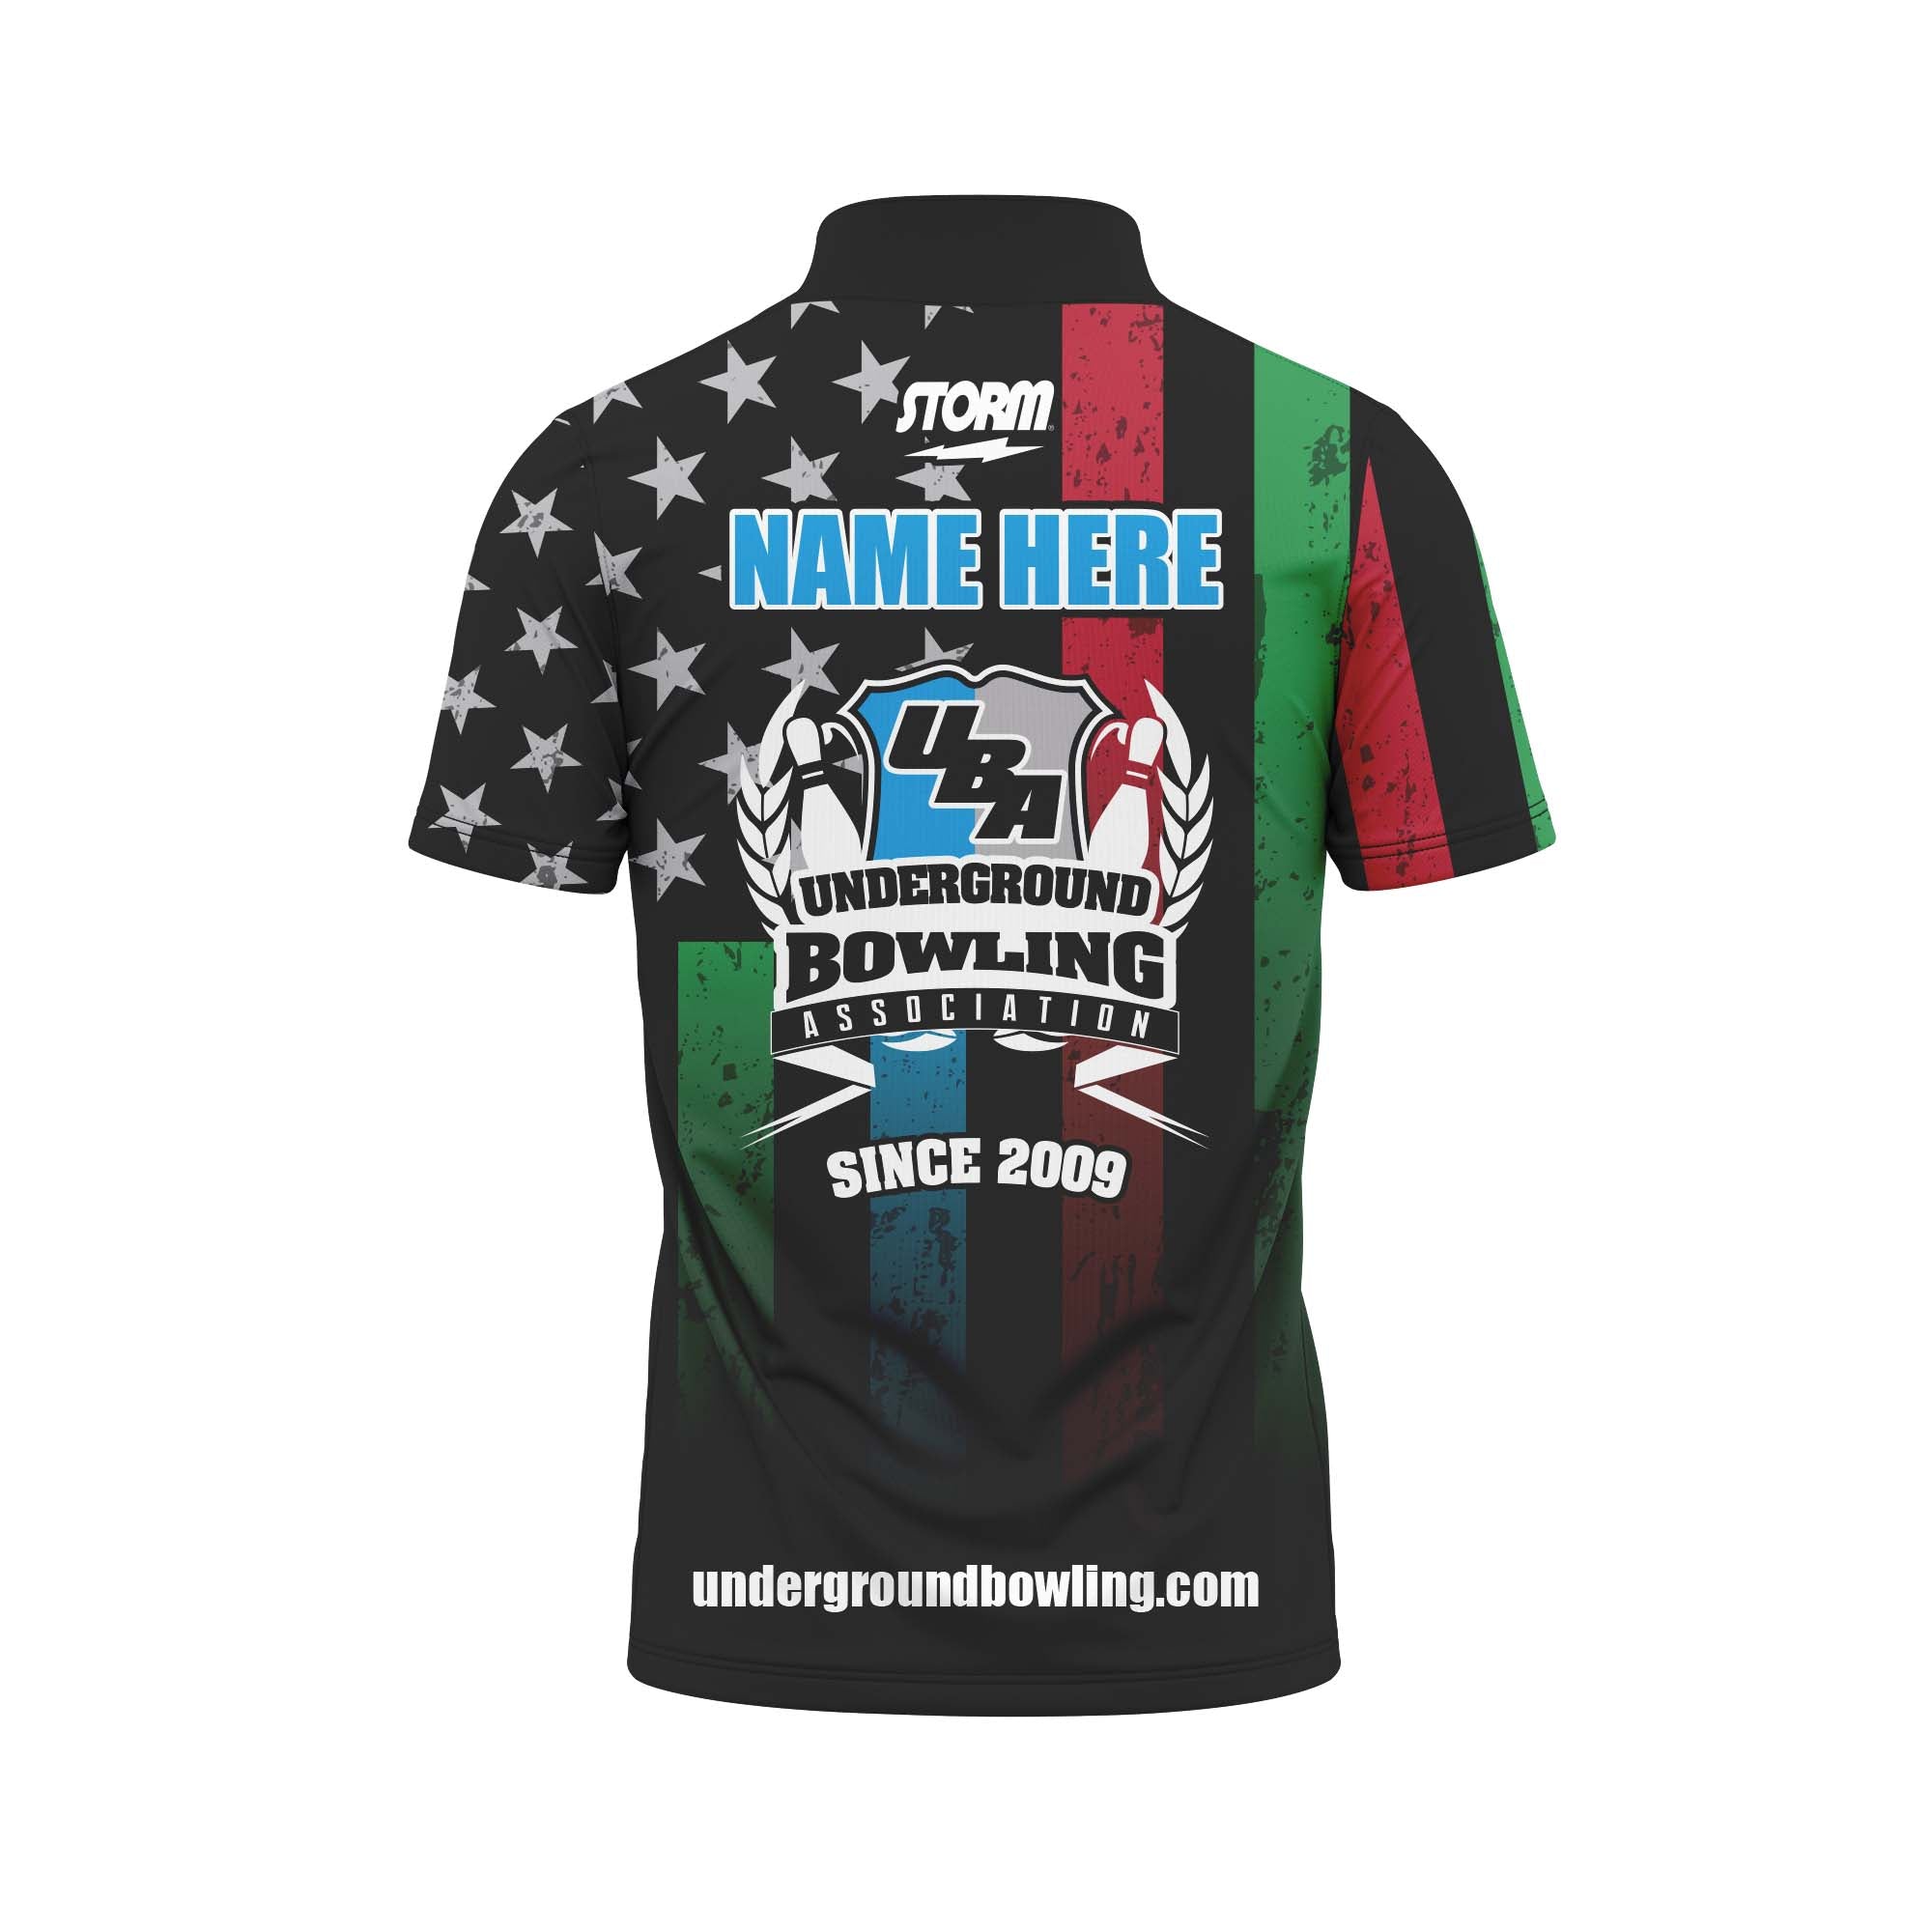 Insurgents First Responders Jersey